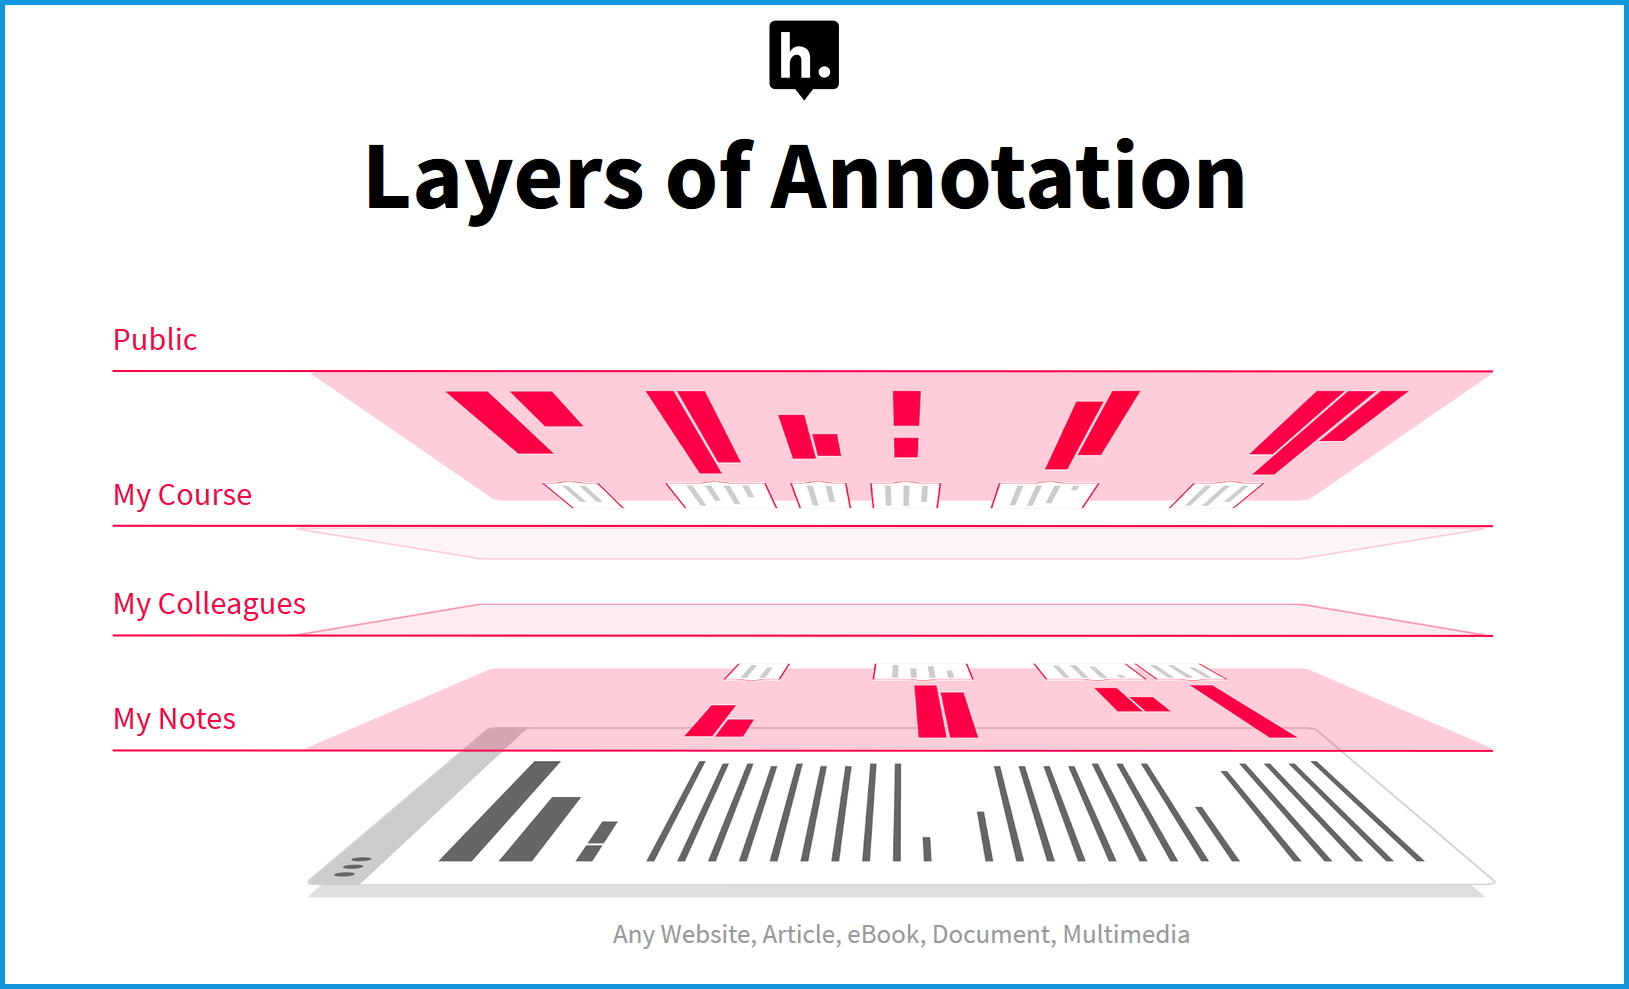 This pictures shows multiple layers of annotations that are possible when using the web annotationtool Hypothesis